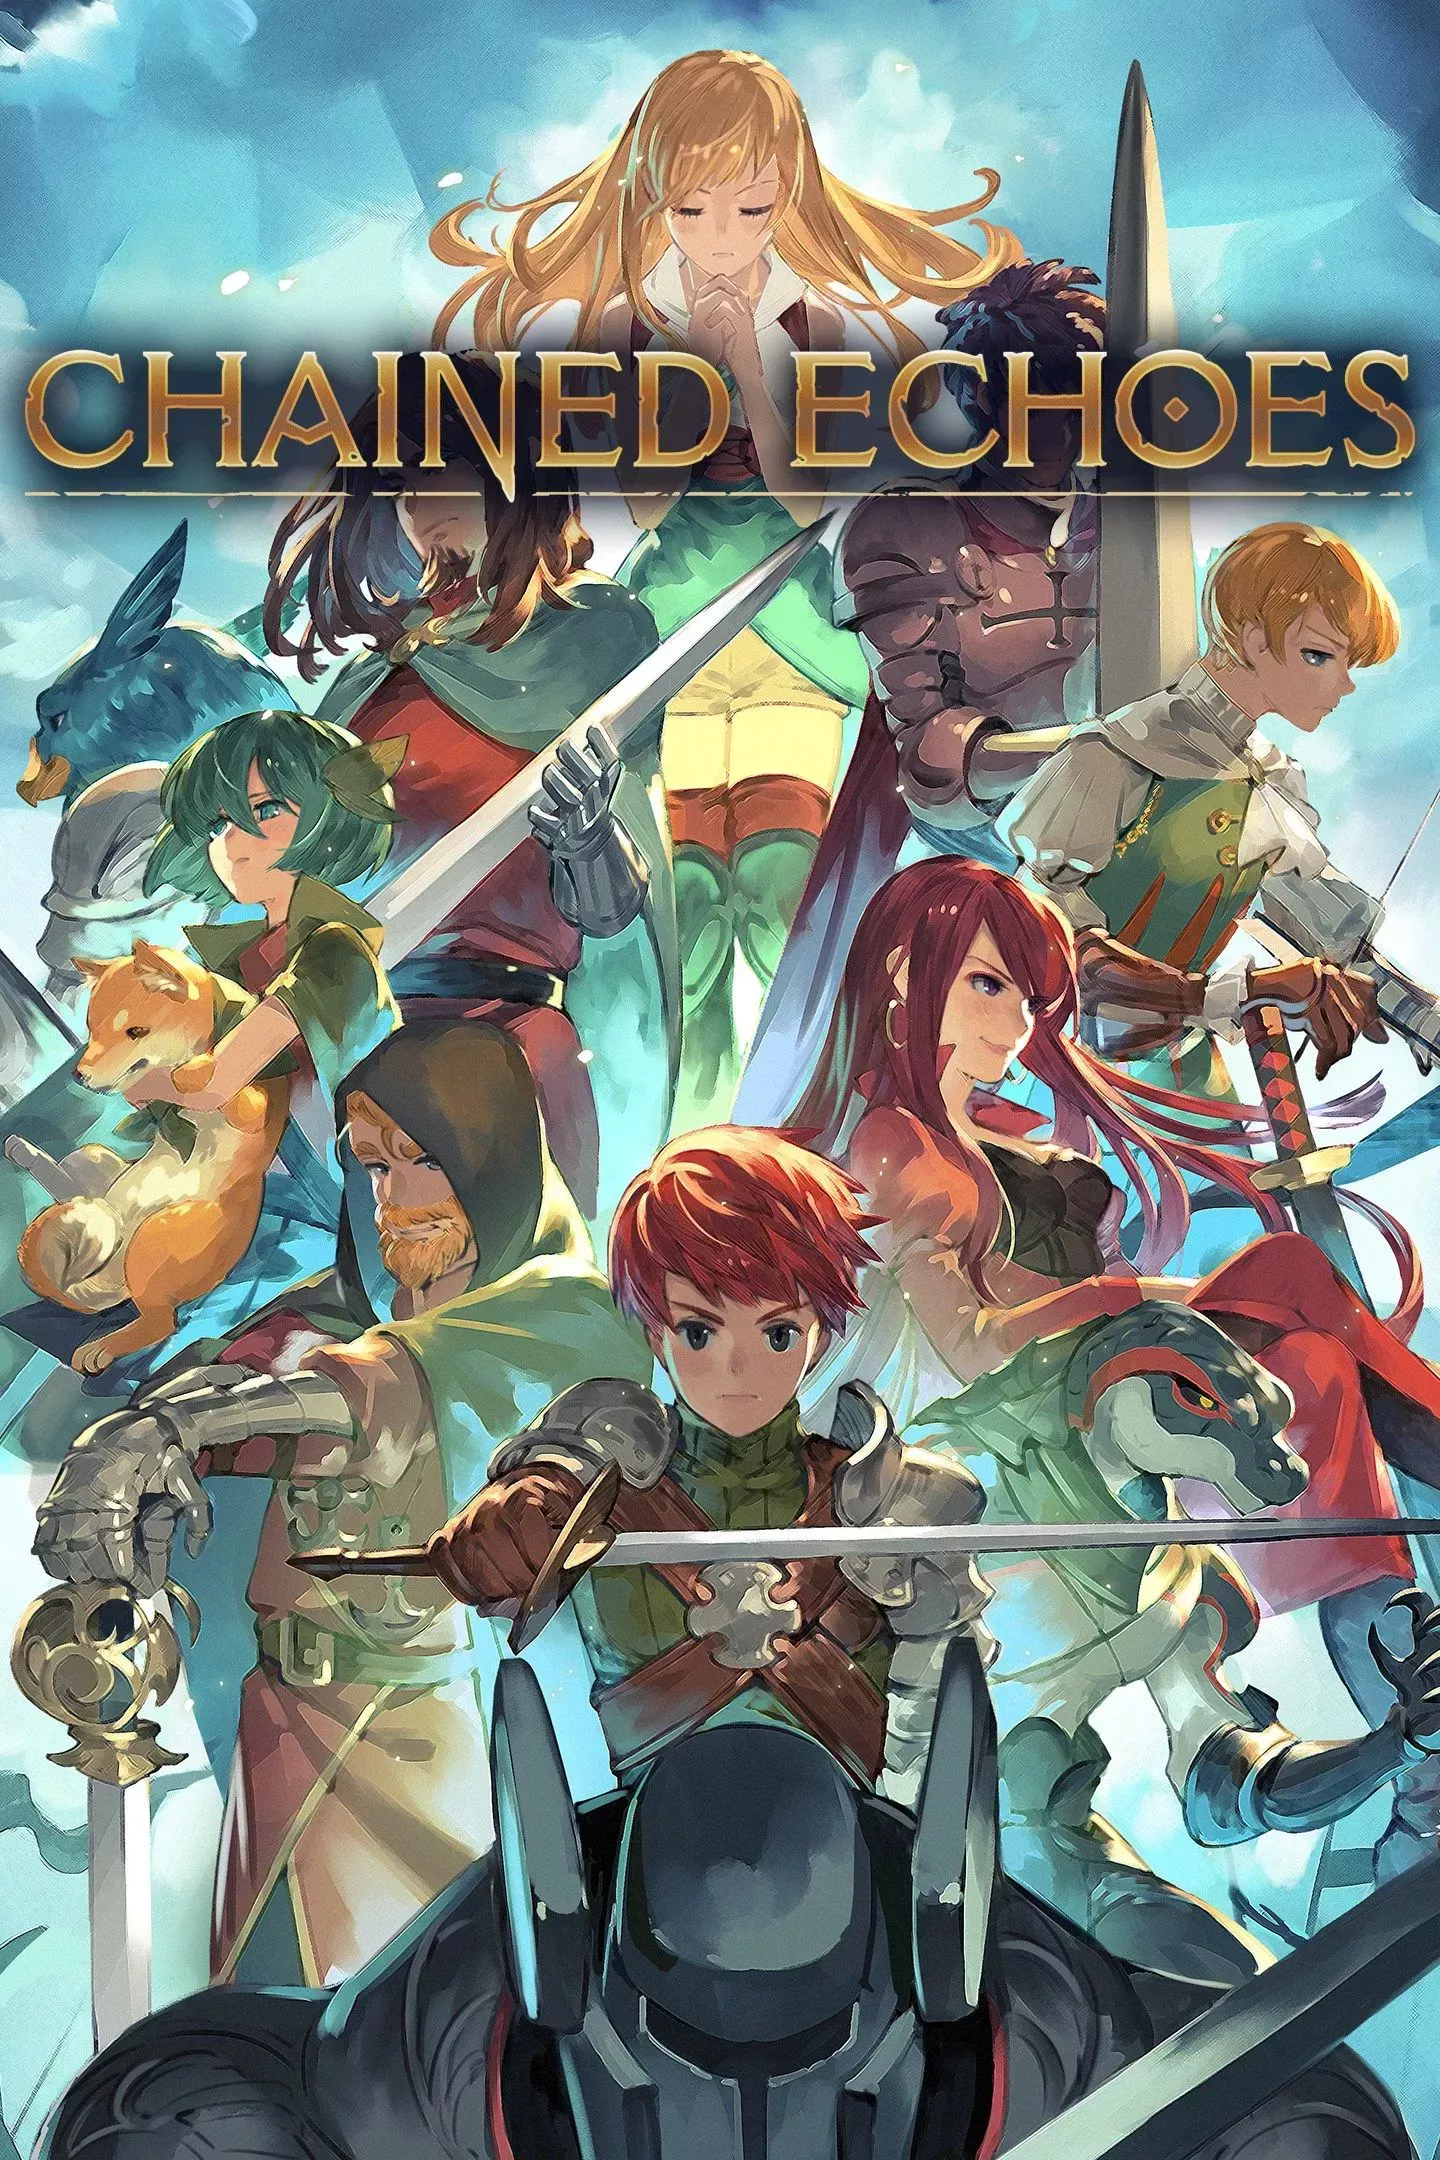 Cover Art for the rpg Chained Echoes